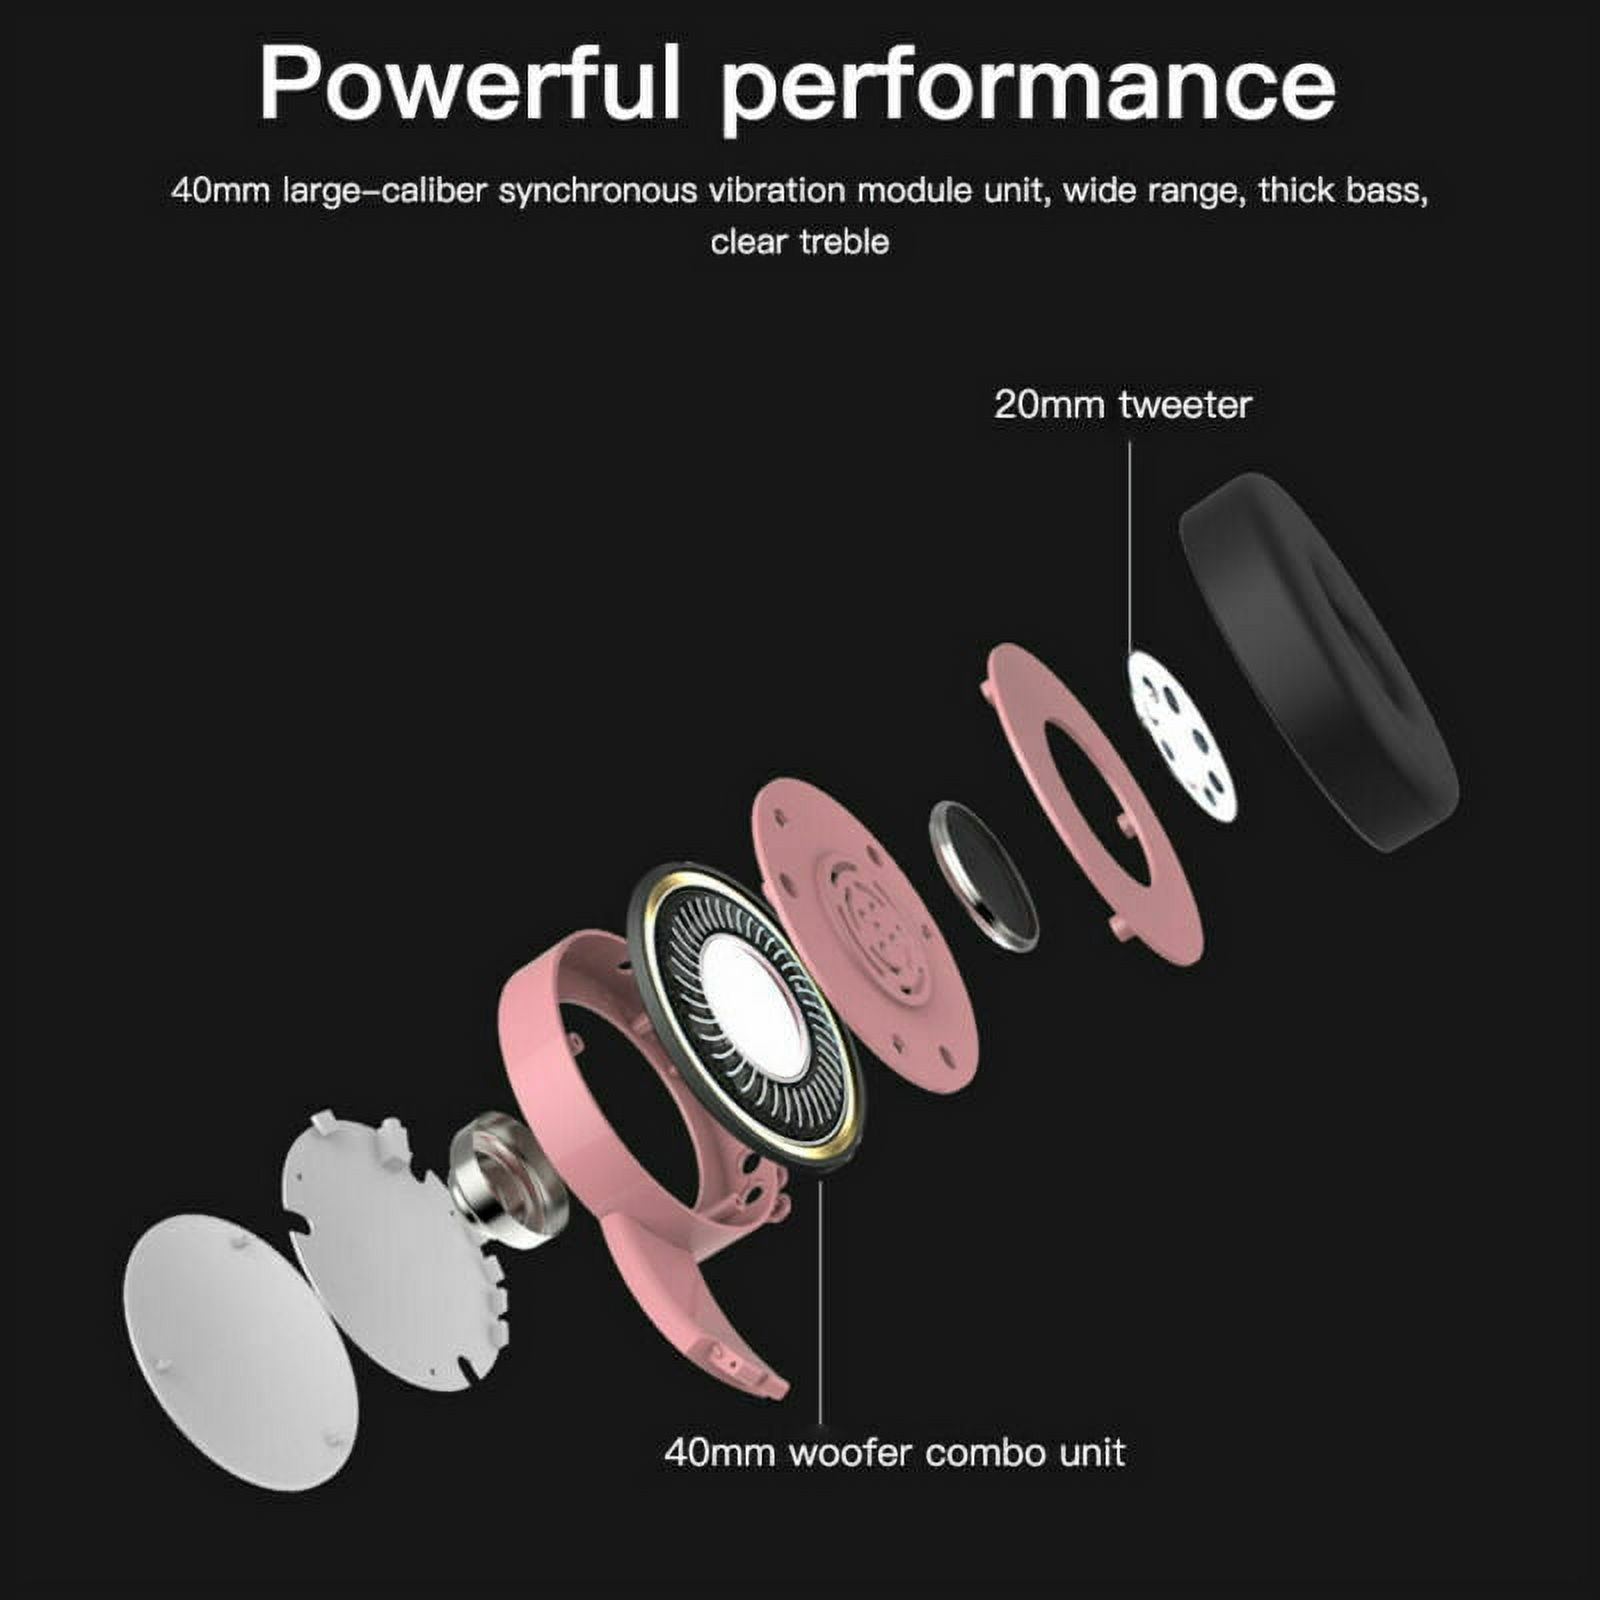 Kids Bluetooth 5.0 Cat Ear Headphones Foldable On-Ear Stereo Wireless Headset with Mic LED Light and Volume Control Support FM Radio/TF Card/Aux in Compatible with Smartphones PC Tablet-Pink - image 5 of 10